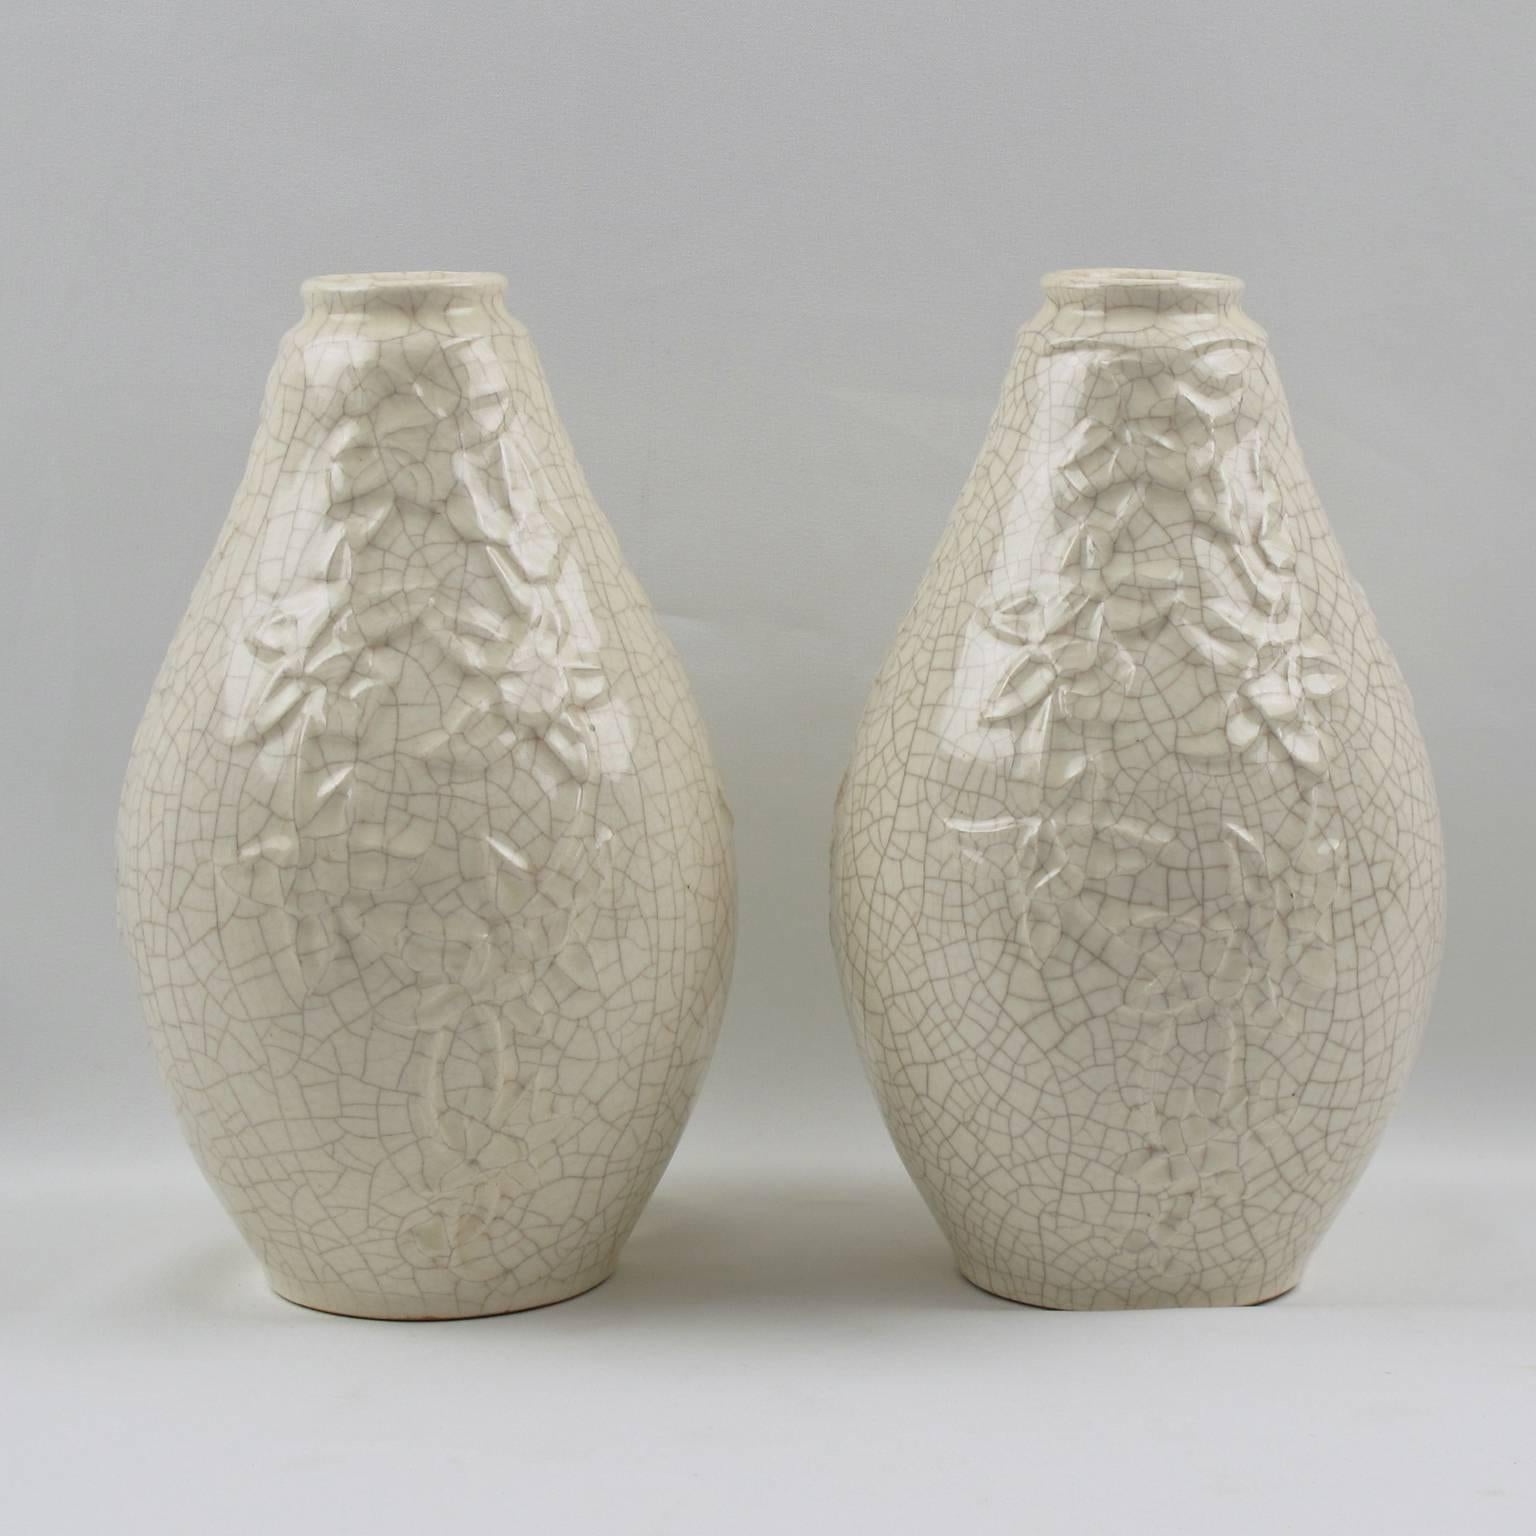 Stunning pair of Art Deco vases by Saint Clement, France. Ceramic vases with white crackle glaze finish. Features an elongated squash shape with narrow opening and garland of flowers design in a stylized pattern (three designs all around). 
The